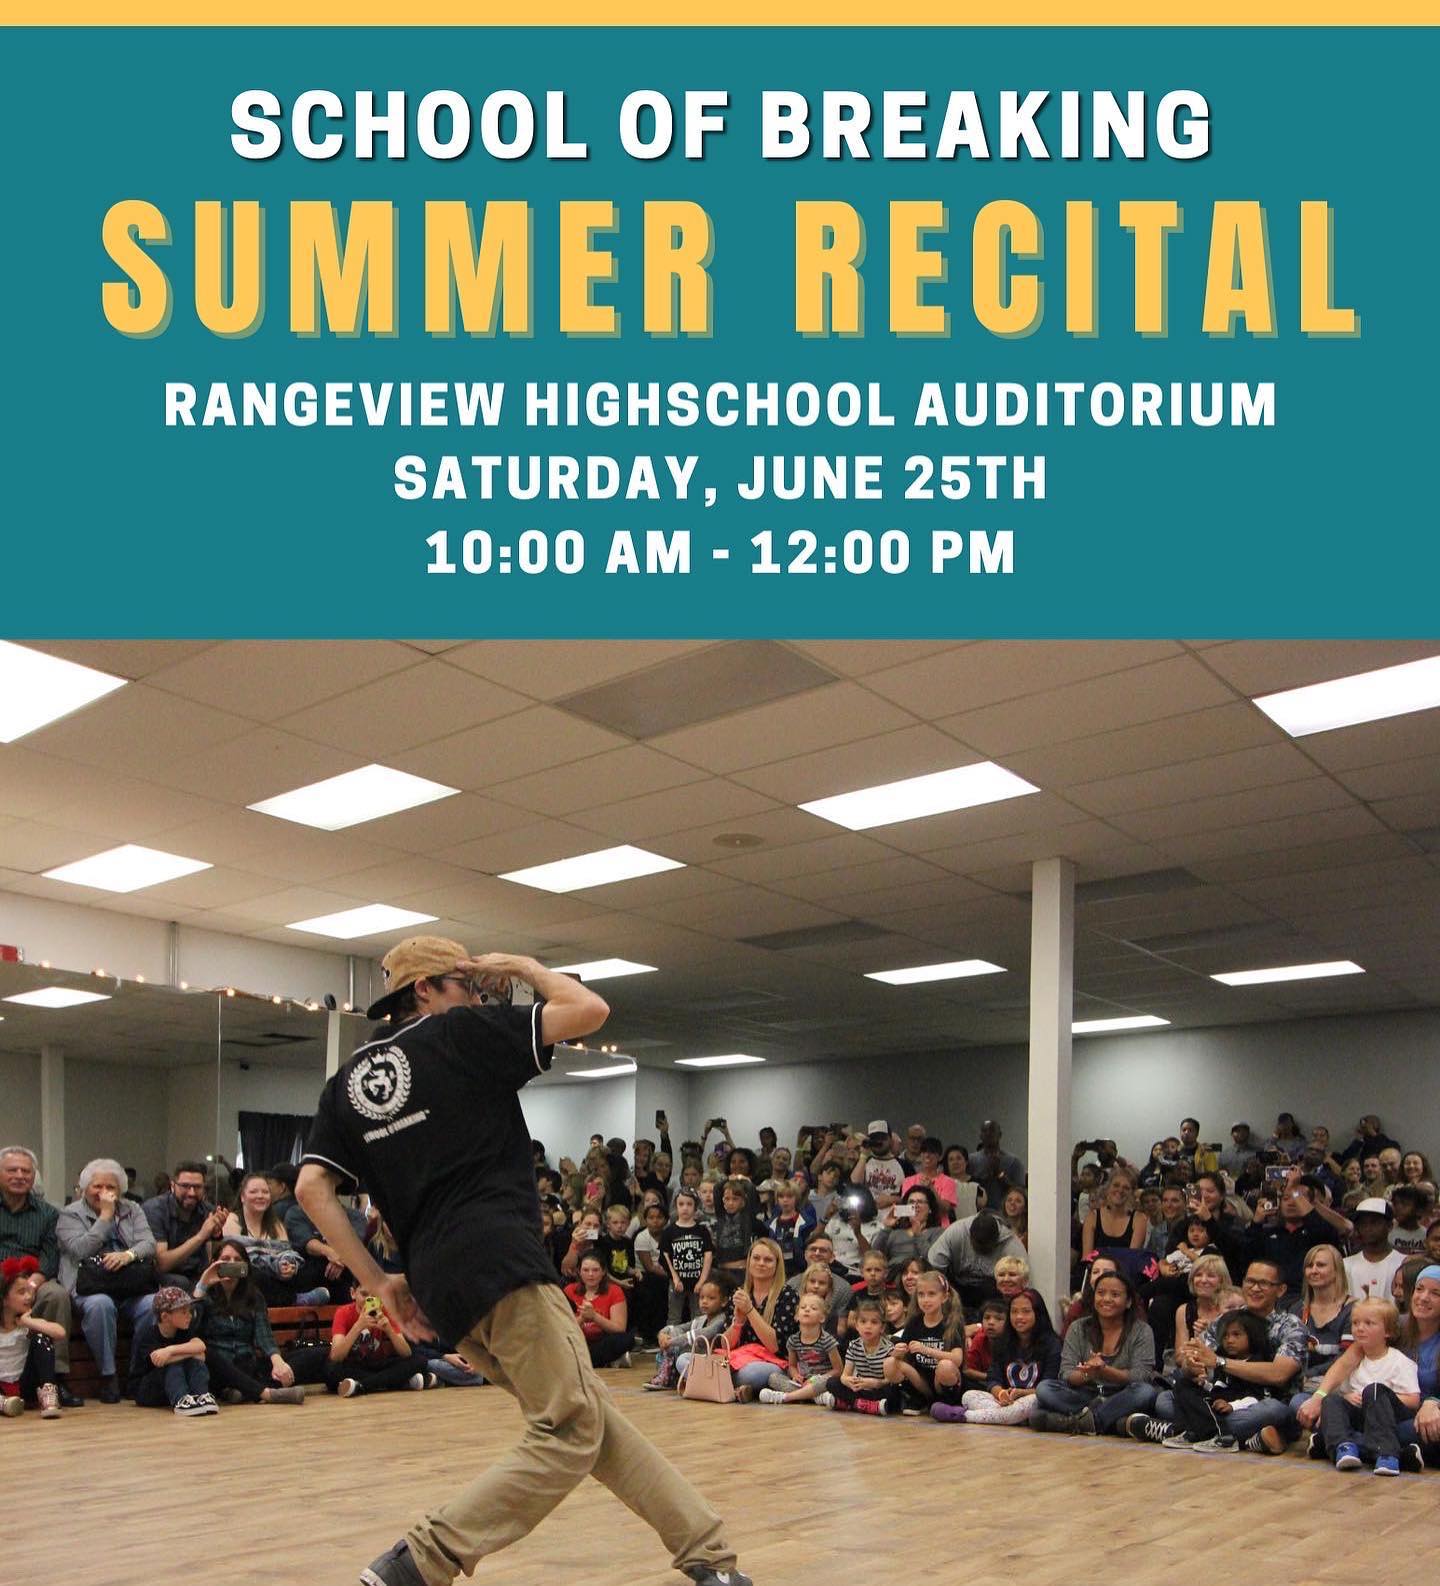 Its finally here, our end of season summer recital going down today ✌️✌️

We did that everyone congratulations to successfully completing the season now let’s share the stage together and do what we all love to do dance 😎💯💥

#schoolofbreaking #summerrecital #summerjam #HipHop #streetdance #culture #breaking #bboy #bgirl #dance #freestyle #performance #expressfreely #peace #love #unity #havingfun

Ticket 🎟 purchases will be available at the door or check the link in our bio